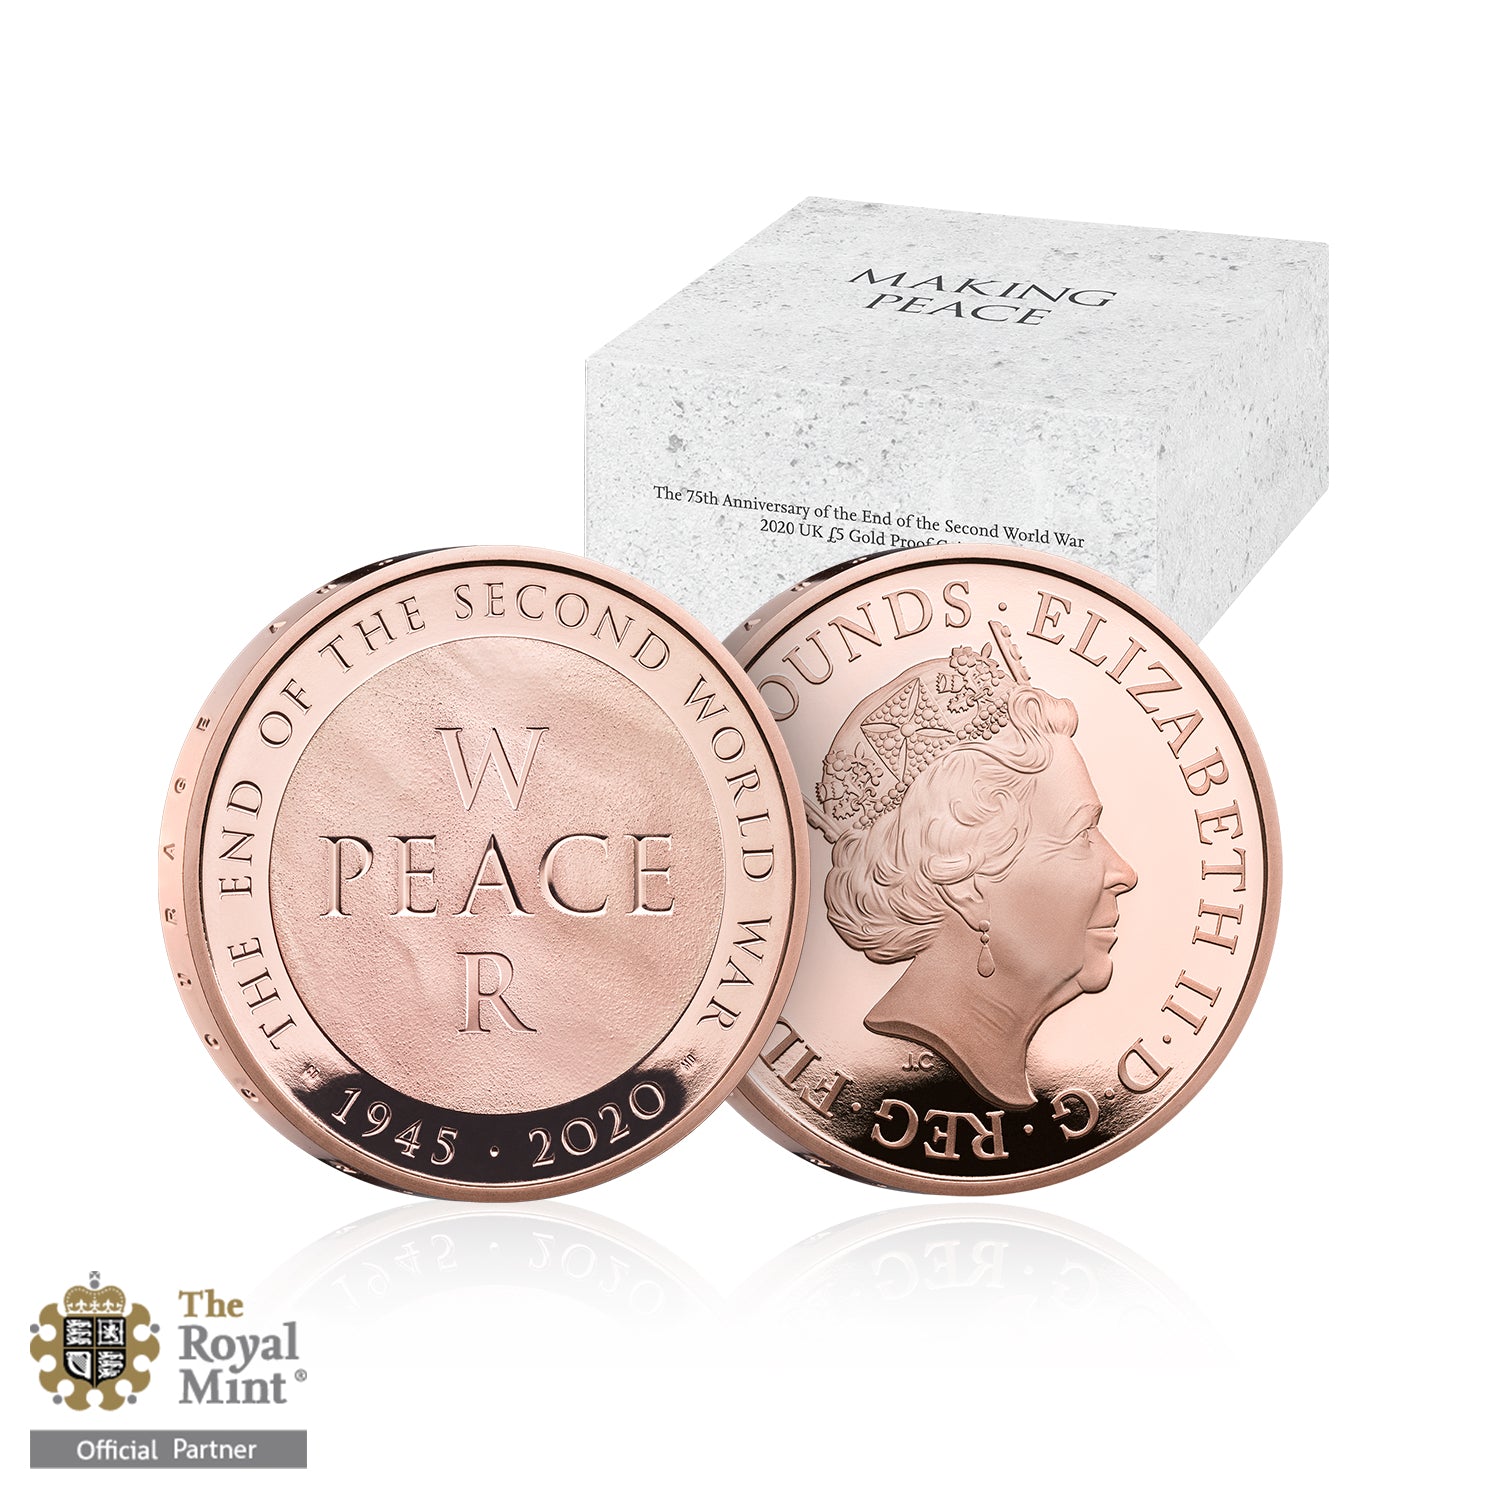 The 75th Anniversary of the Second World War Gold Proof Coin